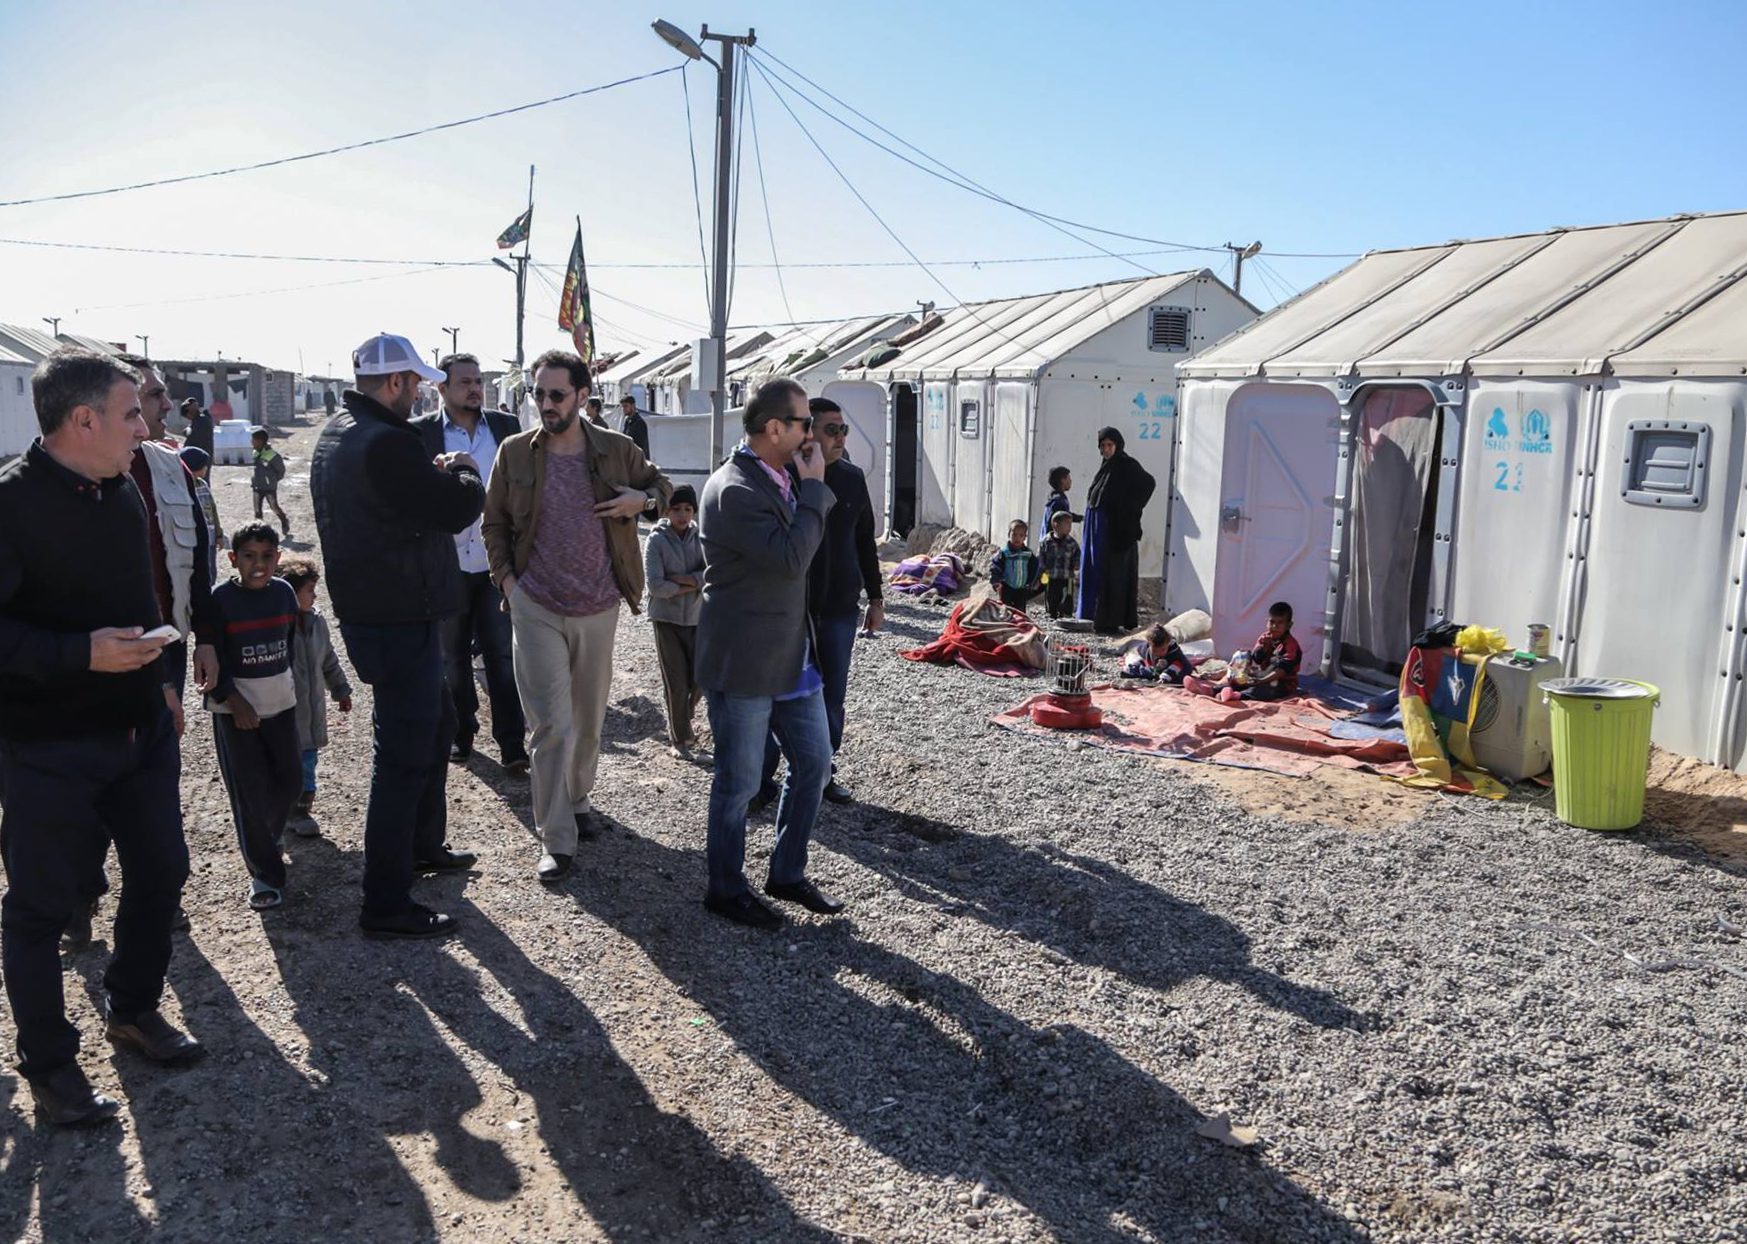 Supporting partners in Iraq to ensure dignity in temporary shelter